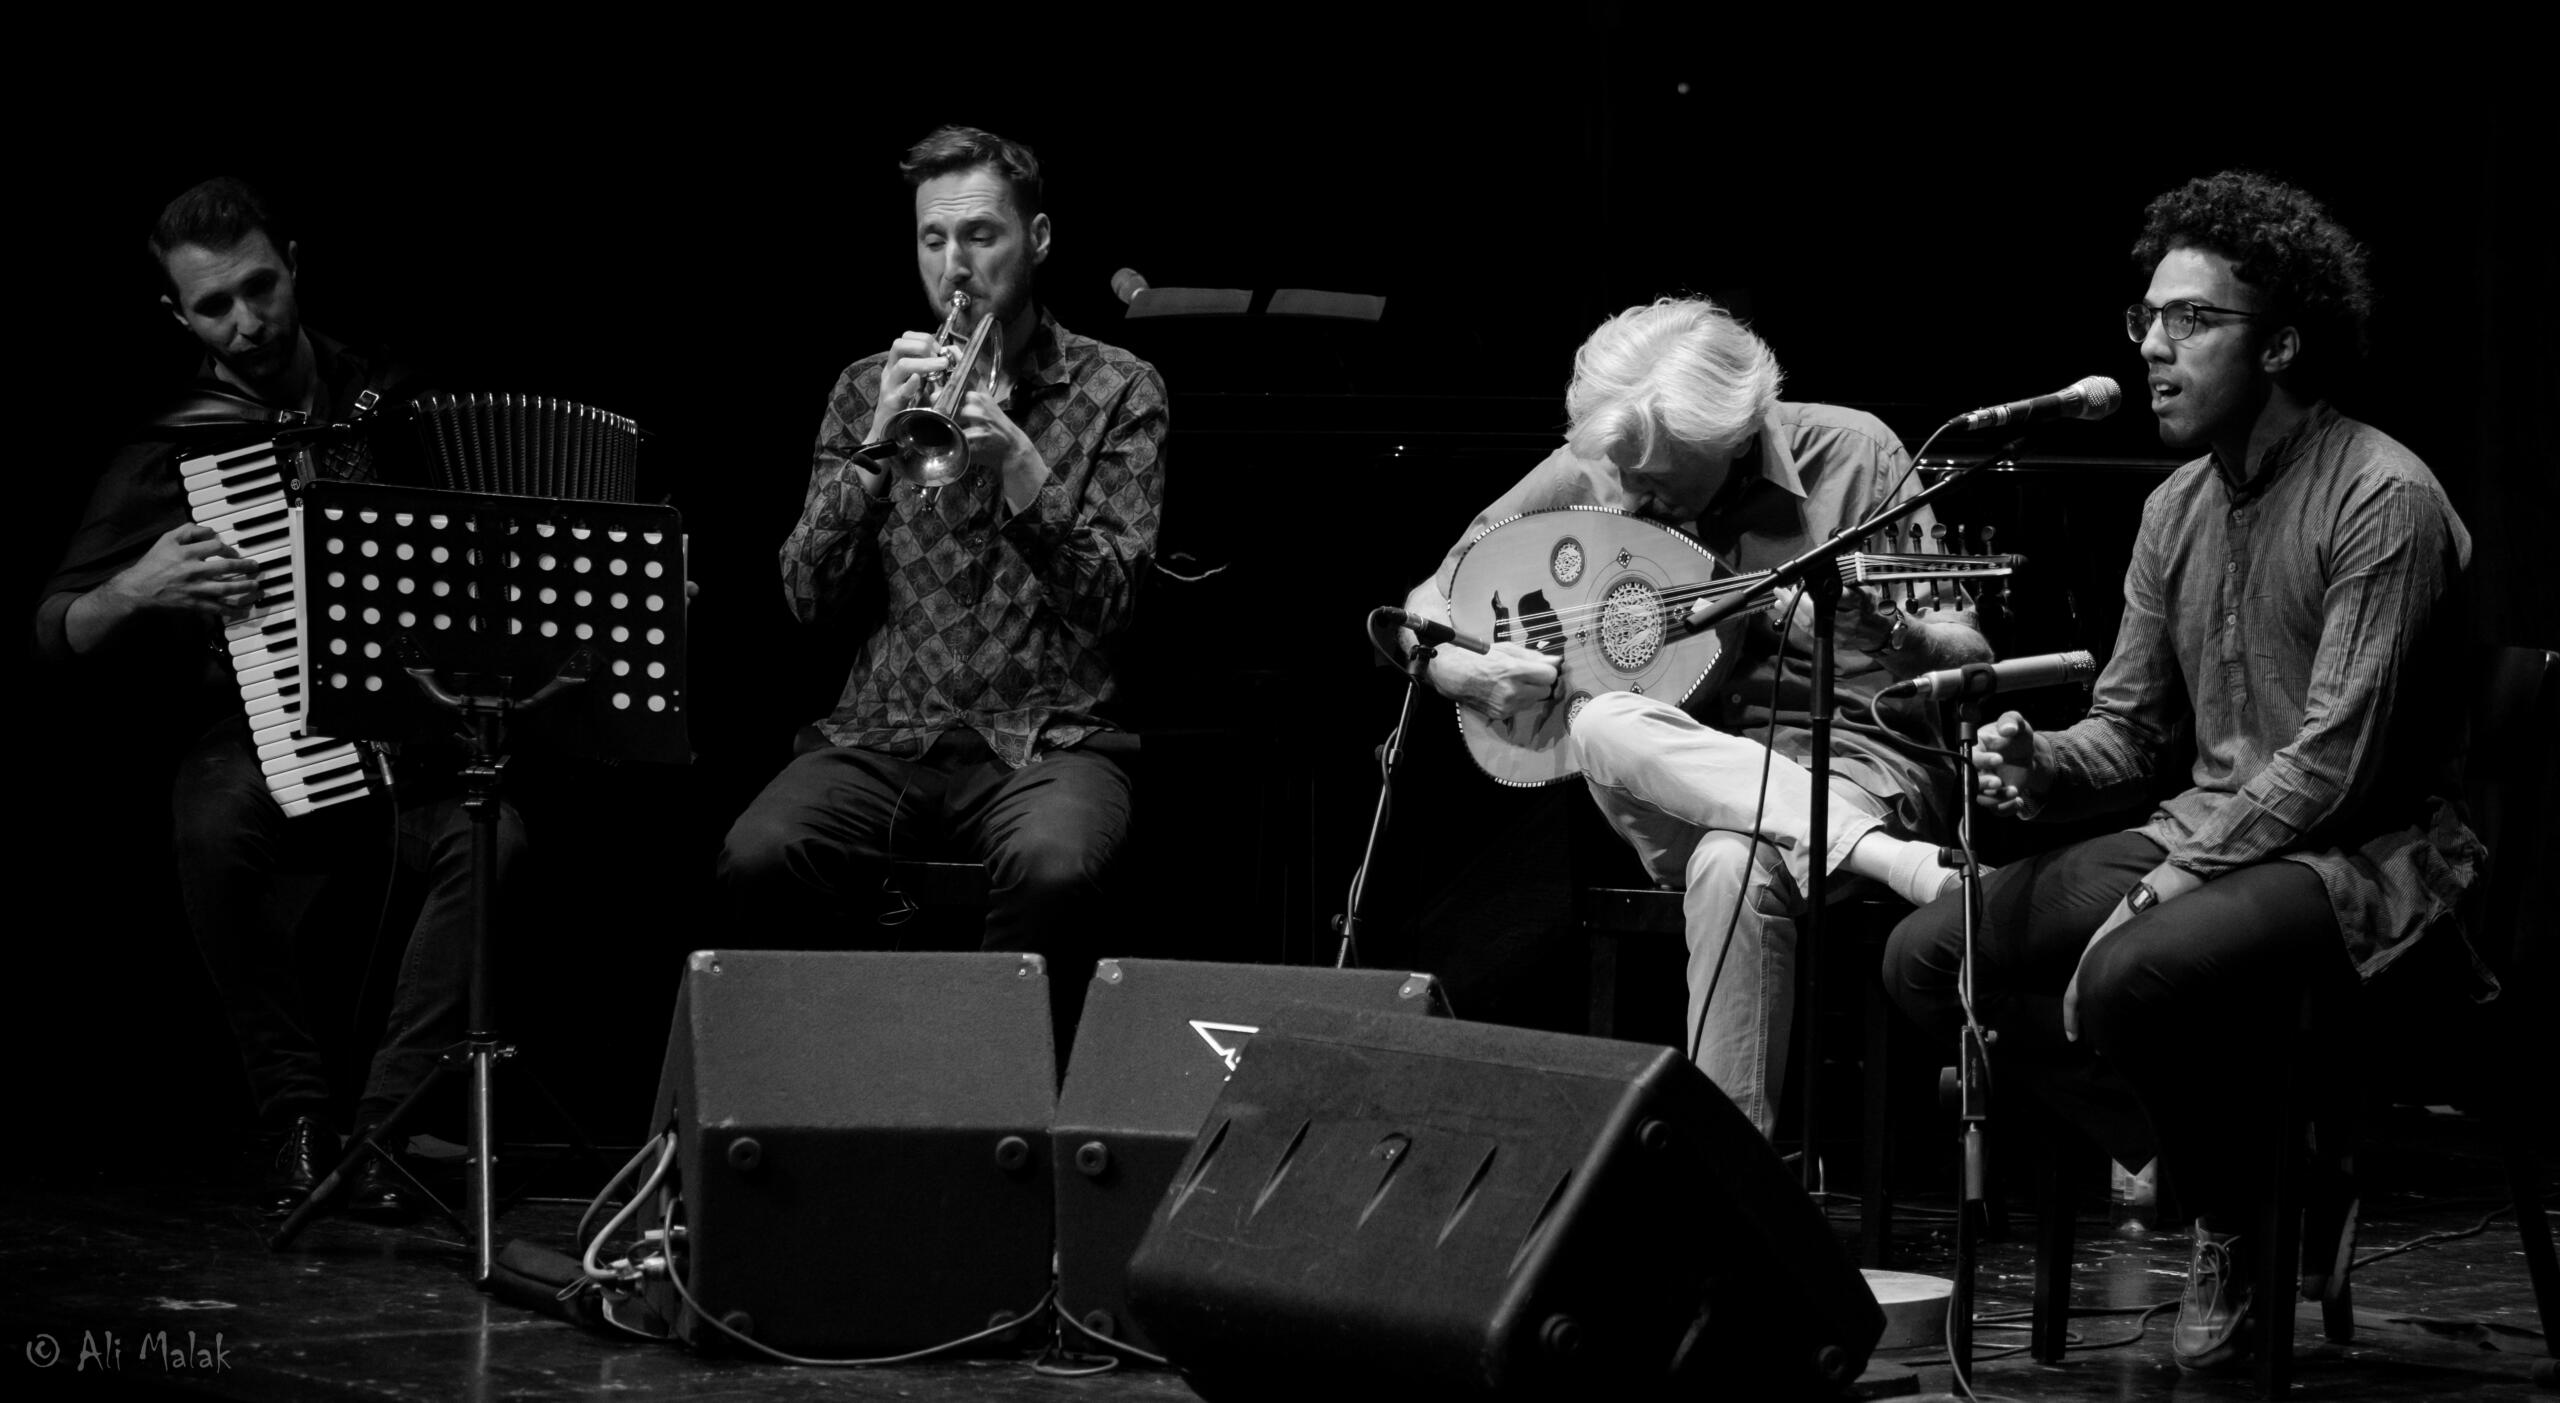 Four musicians sit side by side on a stage.